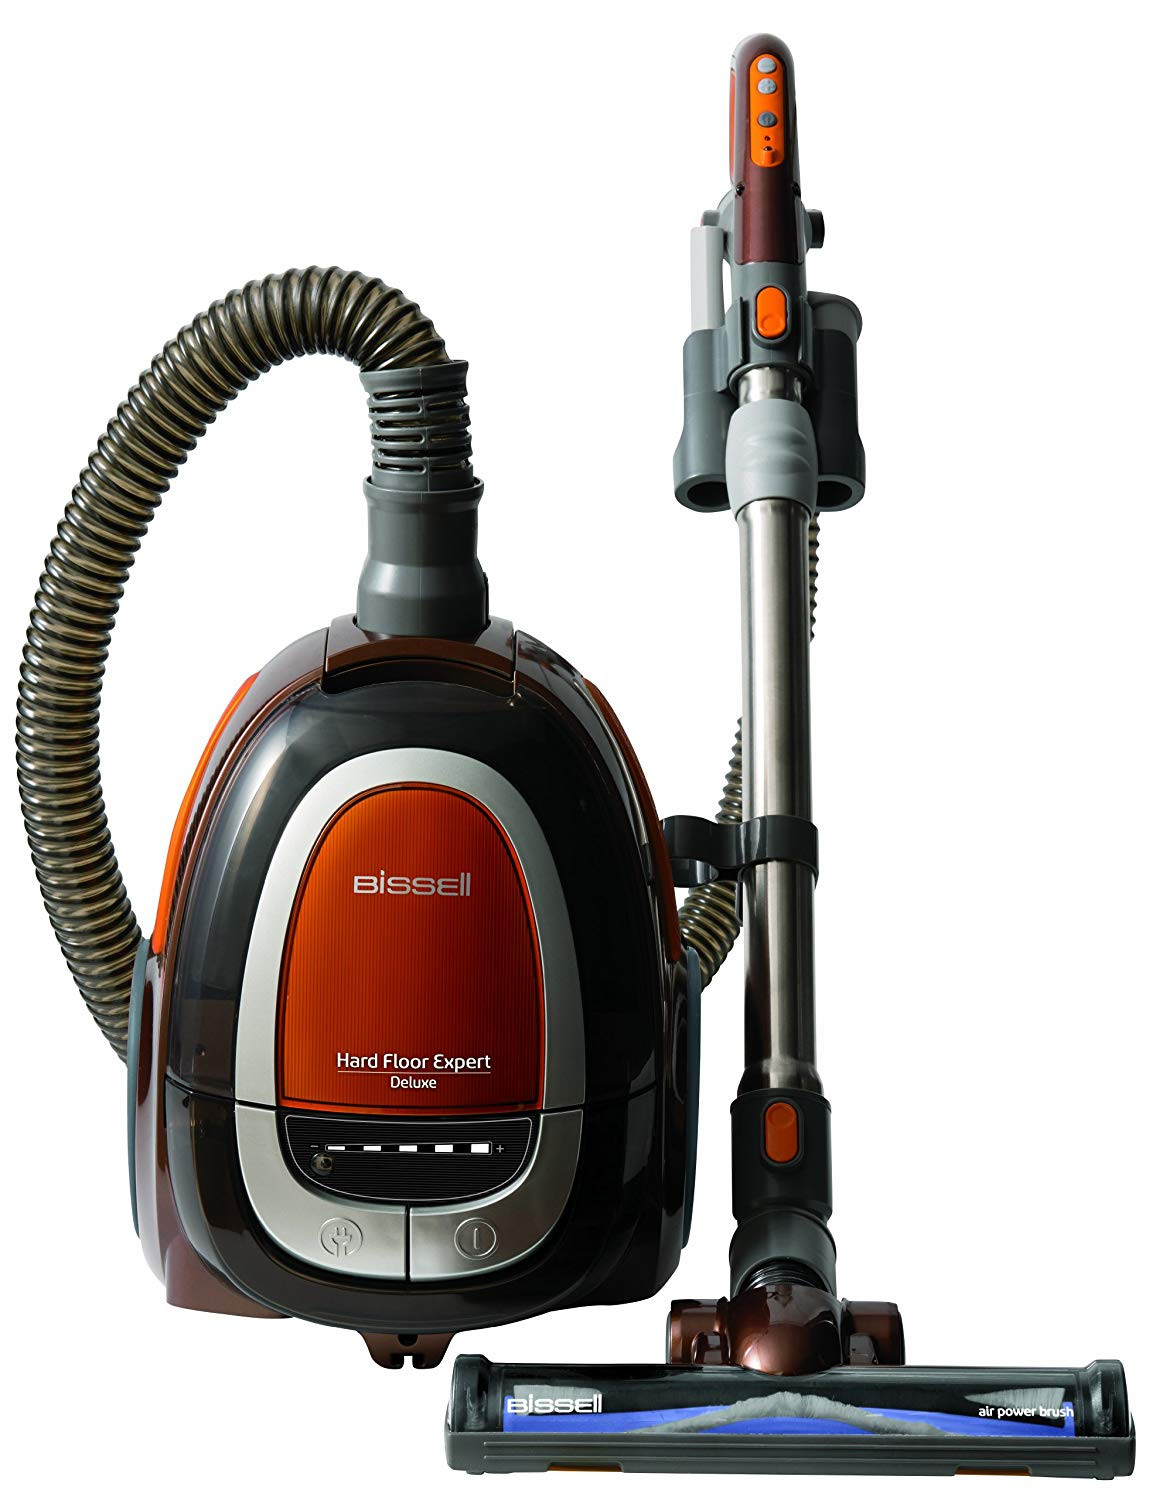 23 Famous Bissell Steam Mop Hardwood Floor Cleaner 2024 free download bissell steam mop hardwood floor cleaner of amazon com bissell hard floor expert deluxe canister vacuum throughout amazon com bissell hard floor expert deluxe canister vacuum cleaner machine